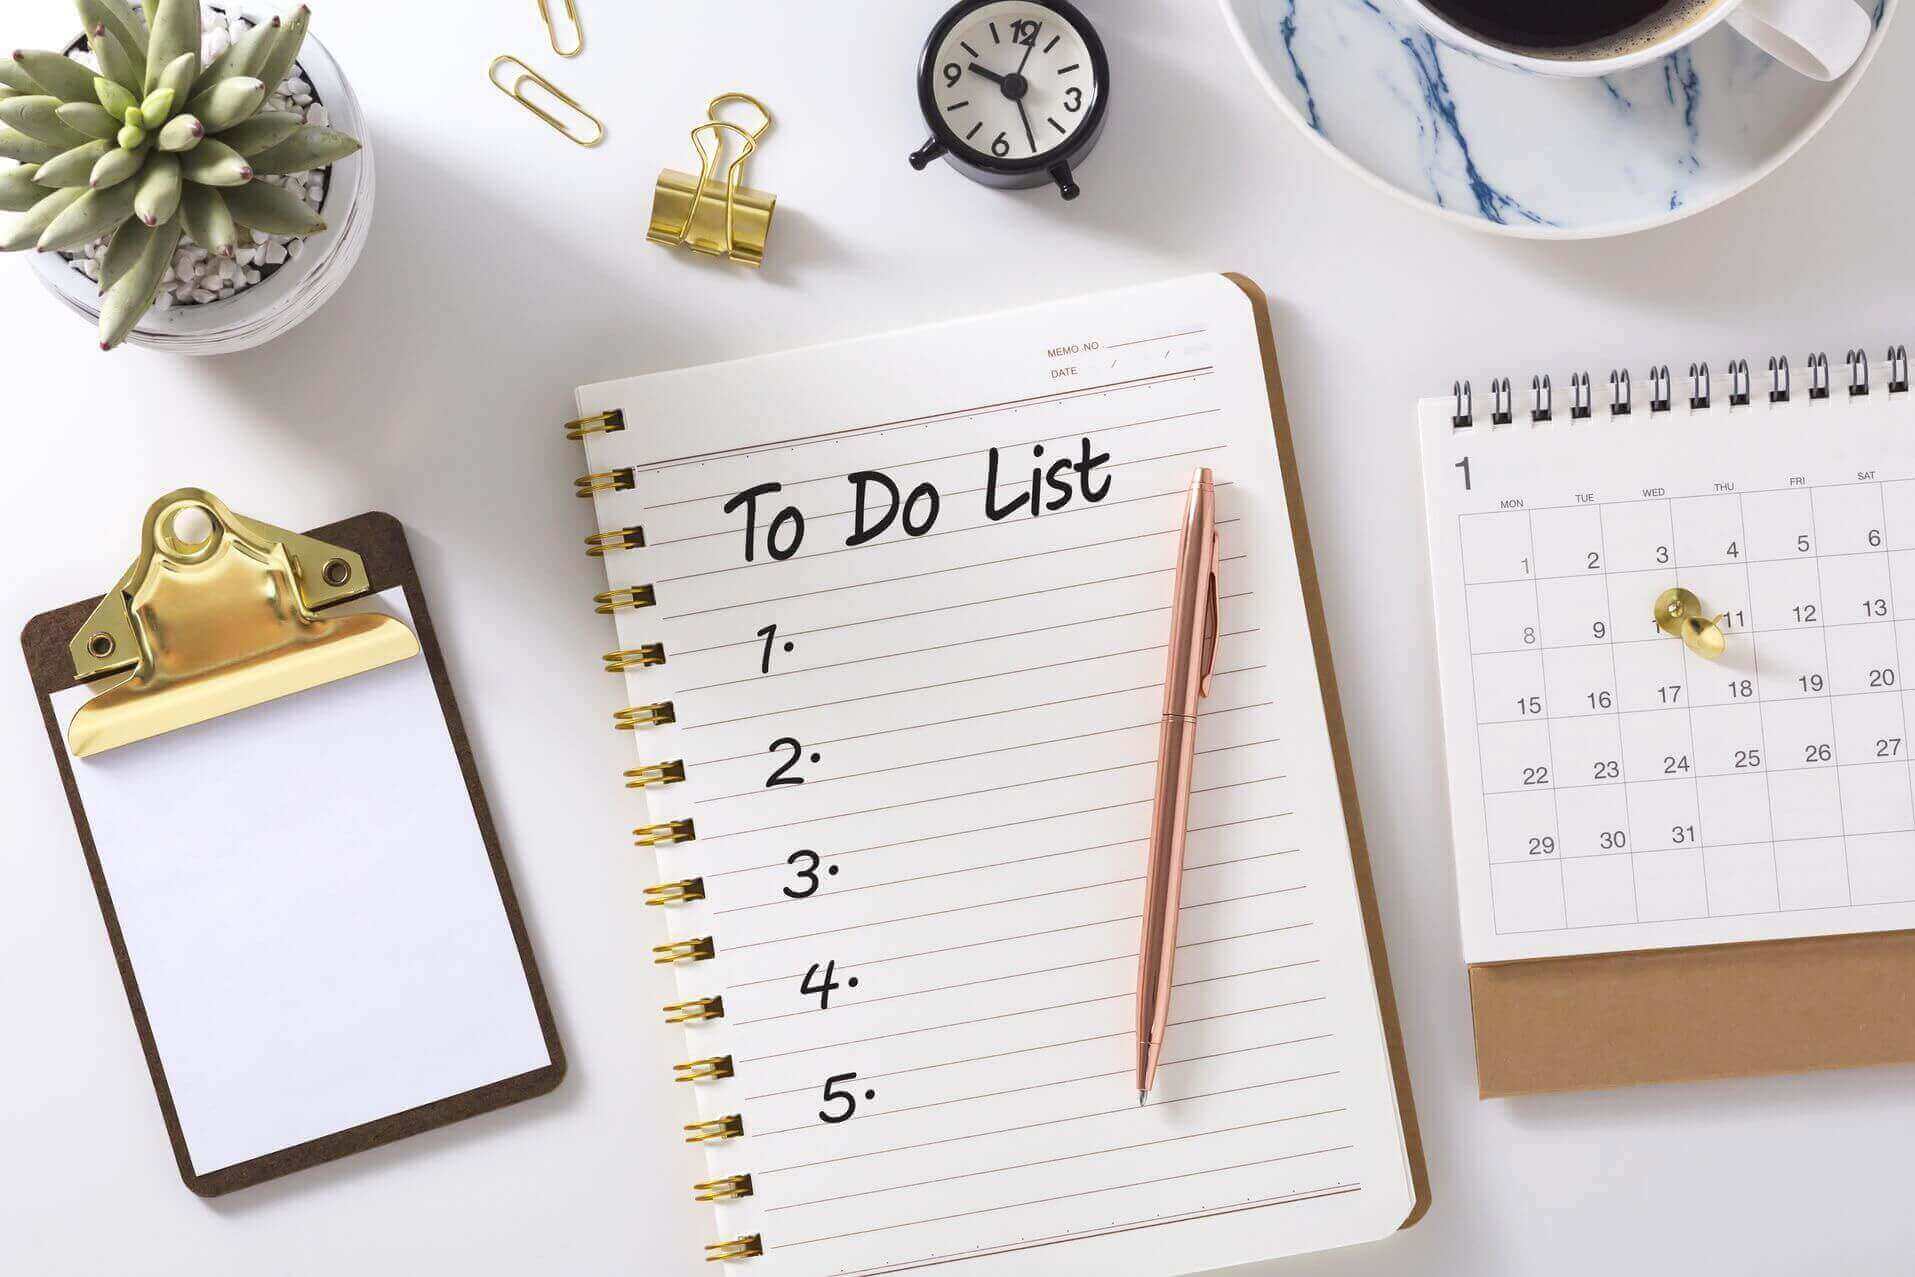 A to-do list, pen, plant, and calendar on the table